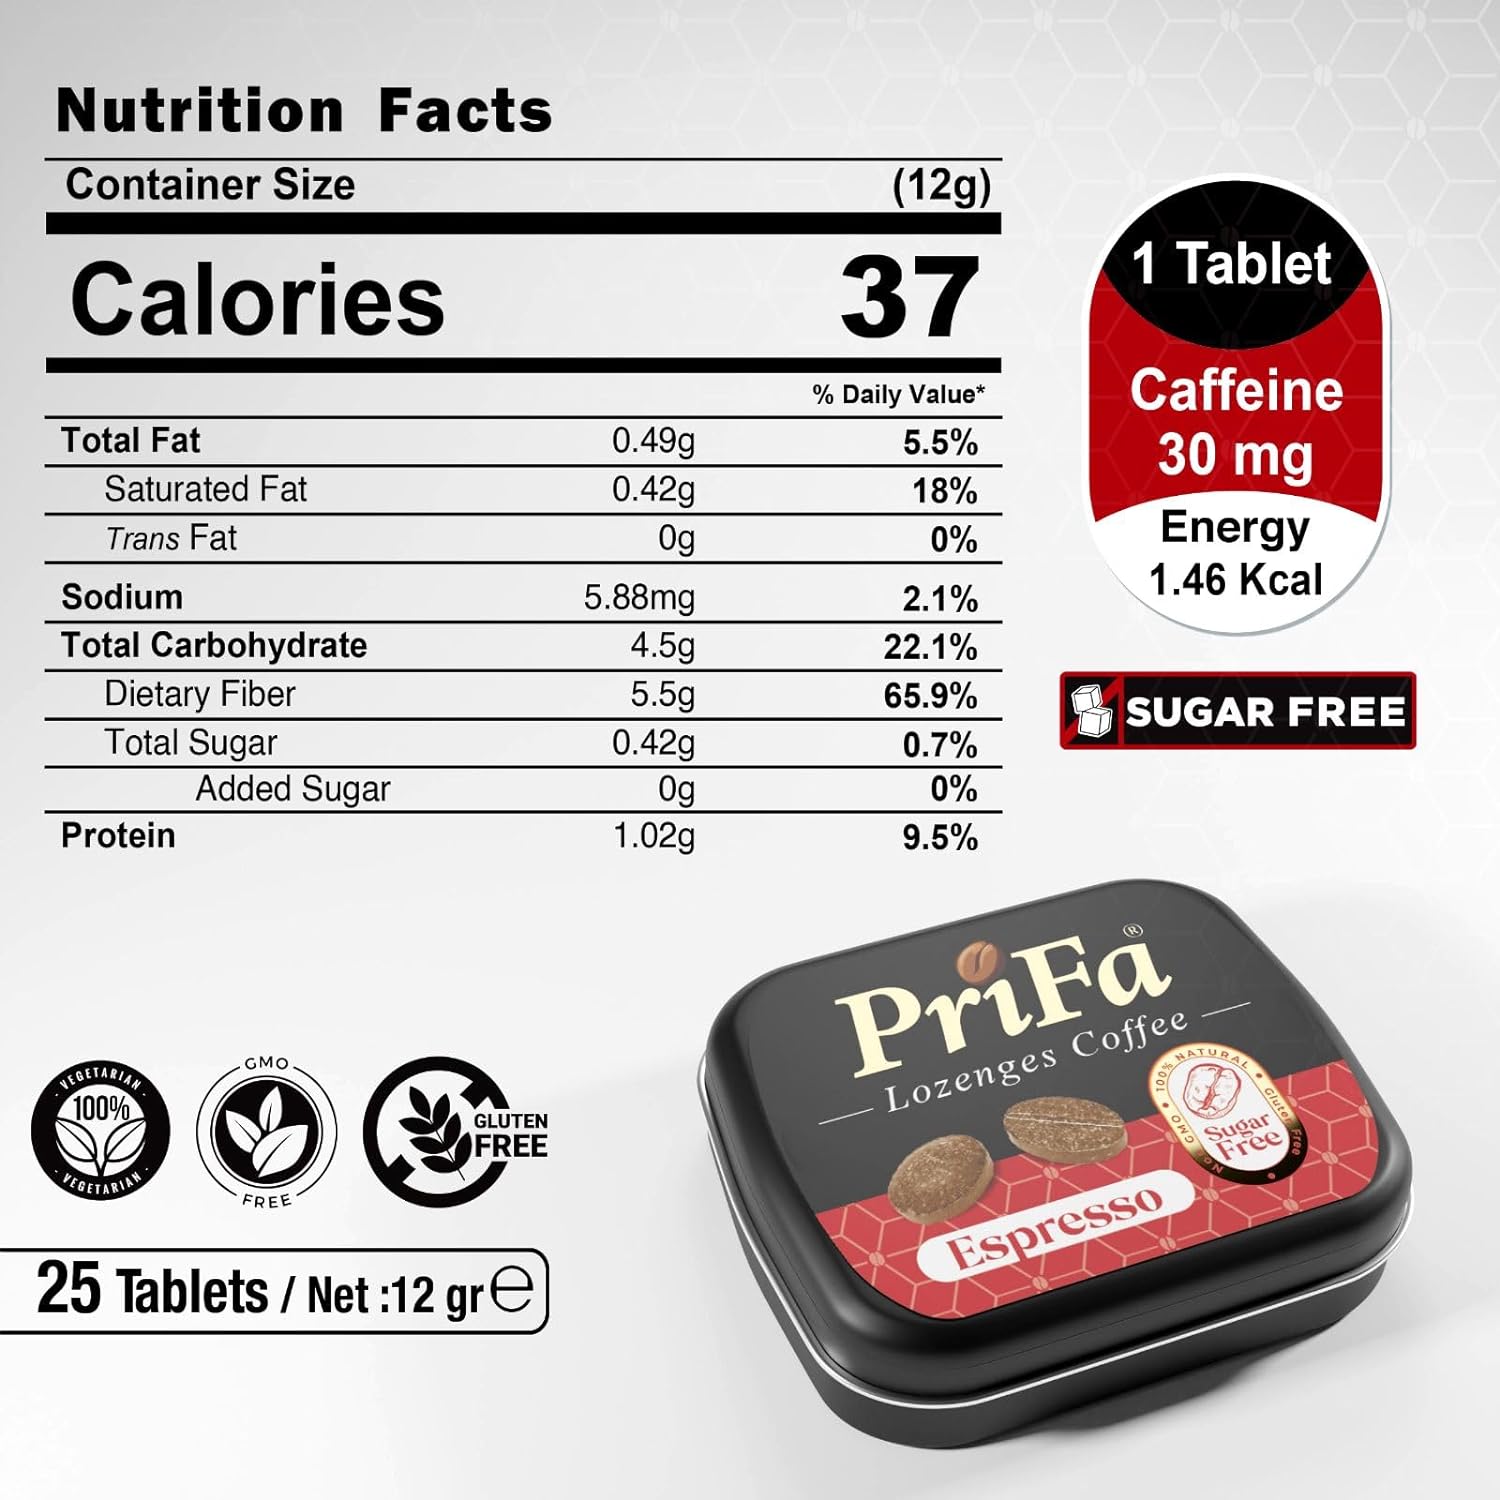 Nutrition facts label and a tin of PriFa coffee lozenges indicating 30 mg caffeine per tablet, sugar-free.